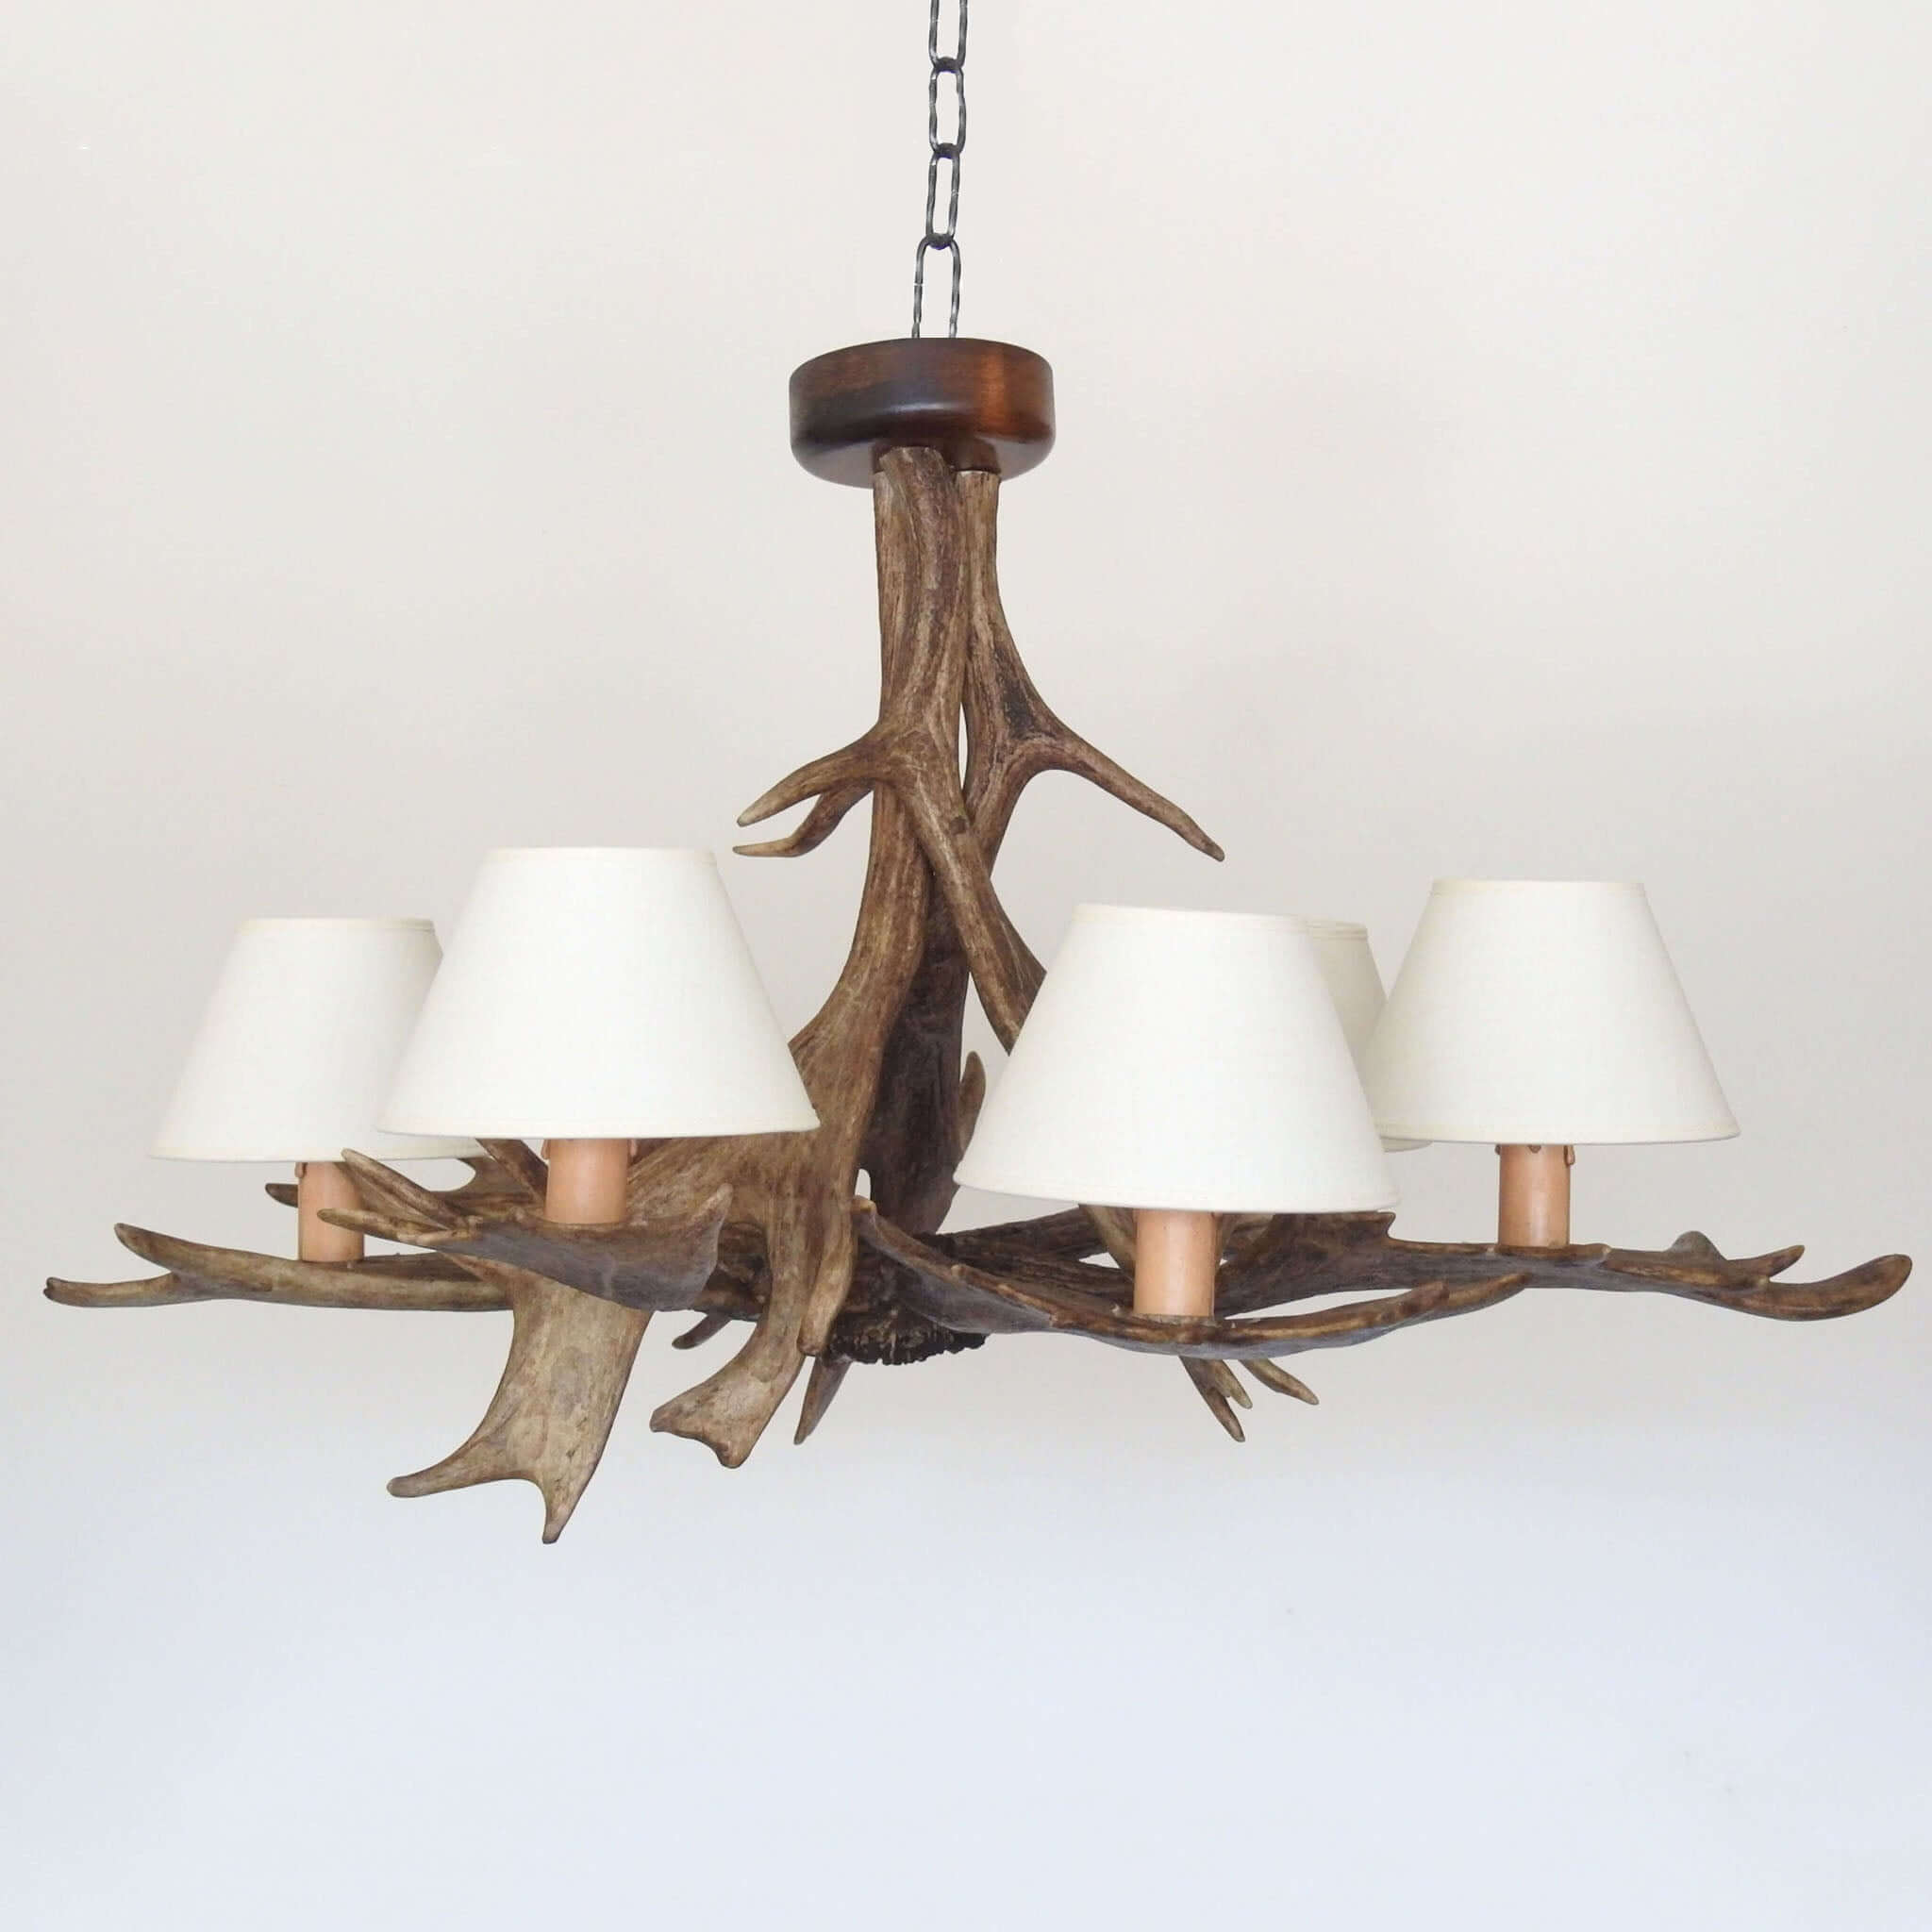 Antler chandelier with shade